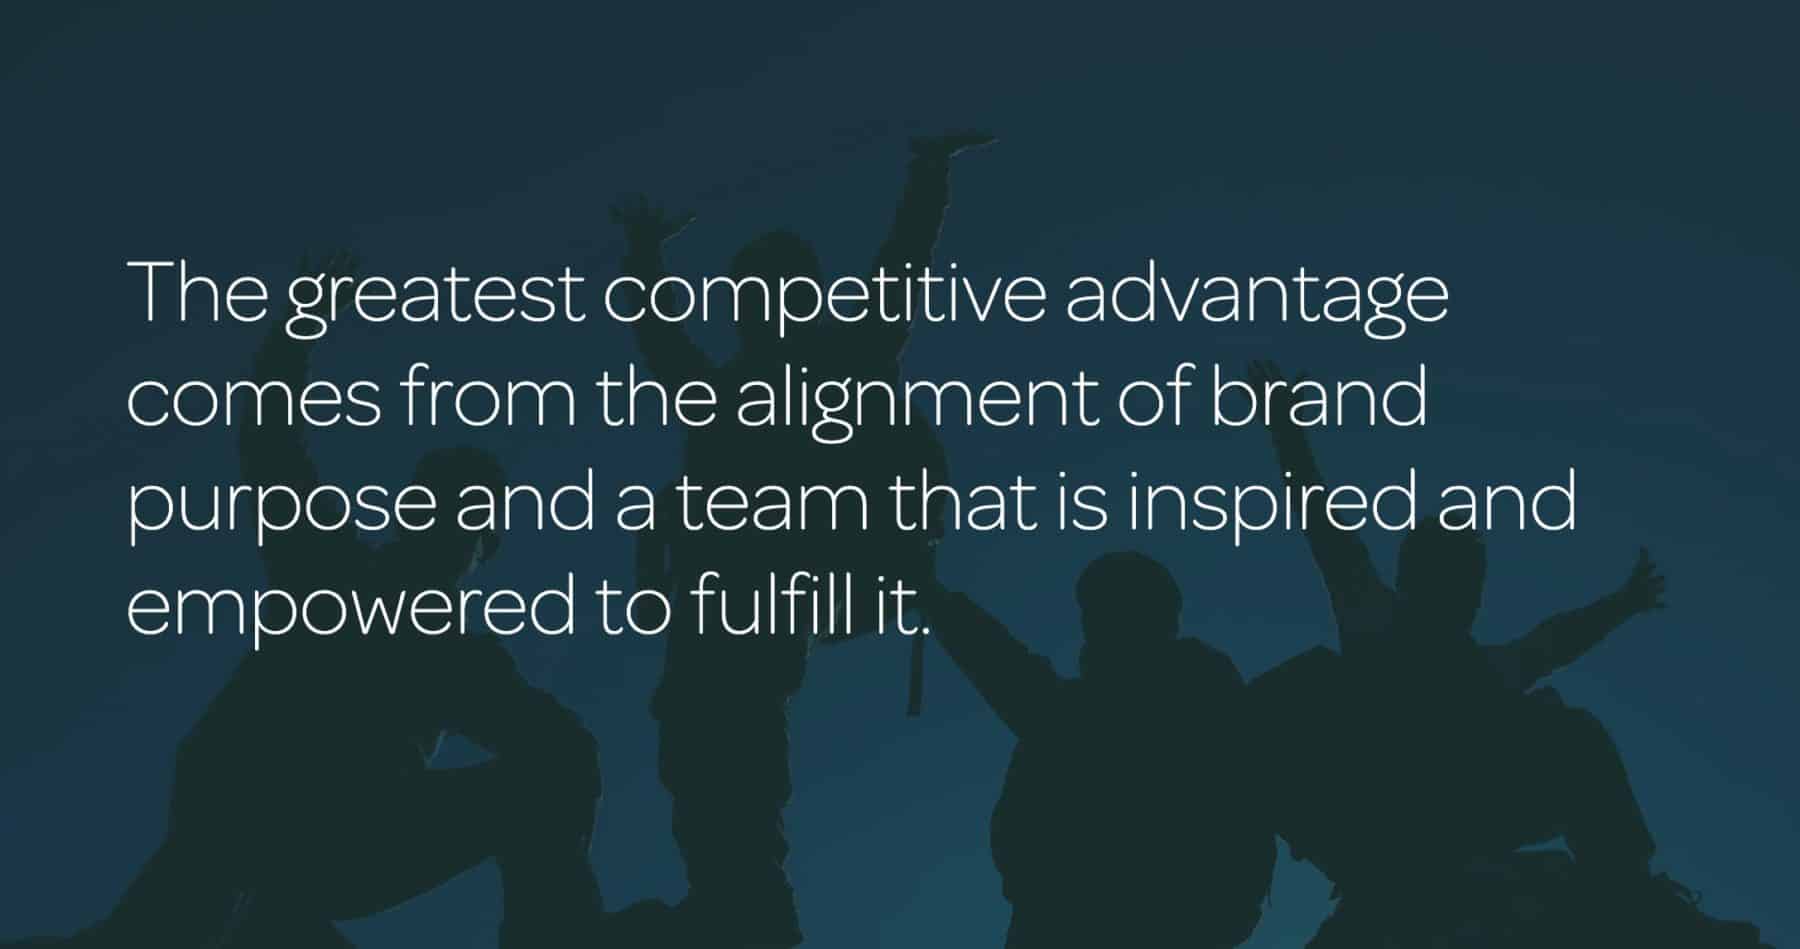 motivational quote about brand and team purpose